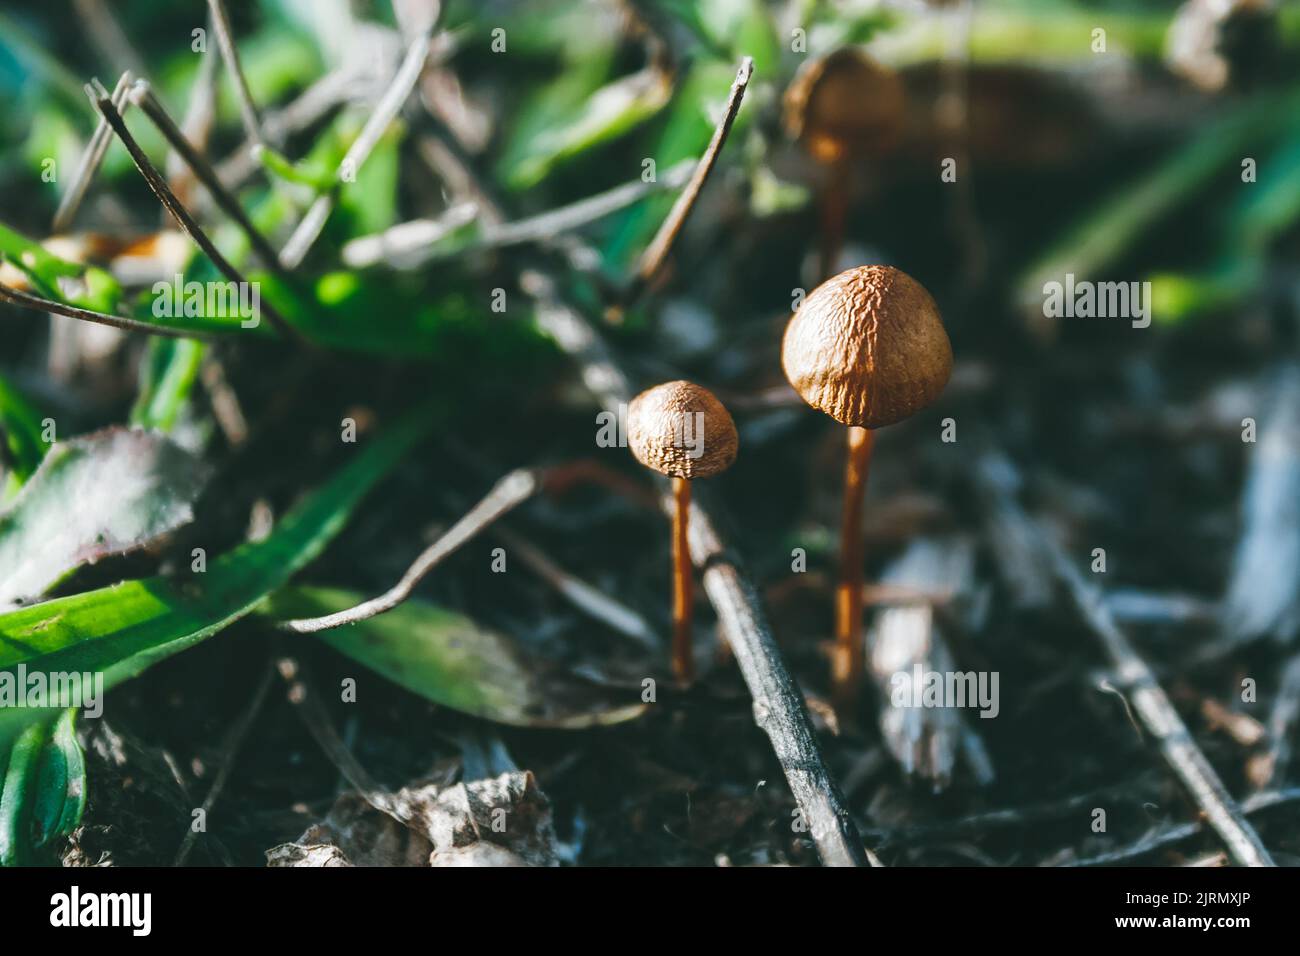 Beautiful small orange mushrooms among dried branches, foliage, mowed grass in mystical autumn misty forest. Selective focus Stock Photo